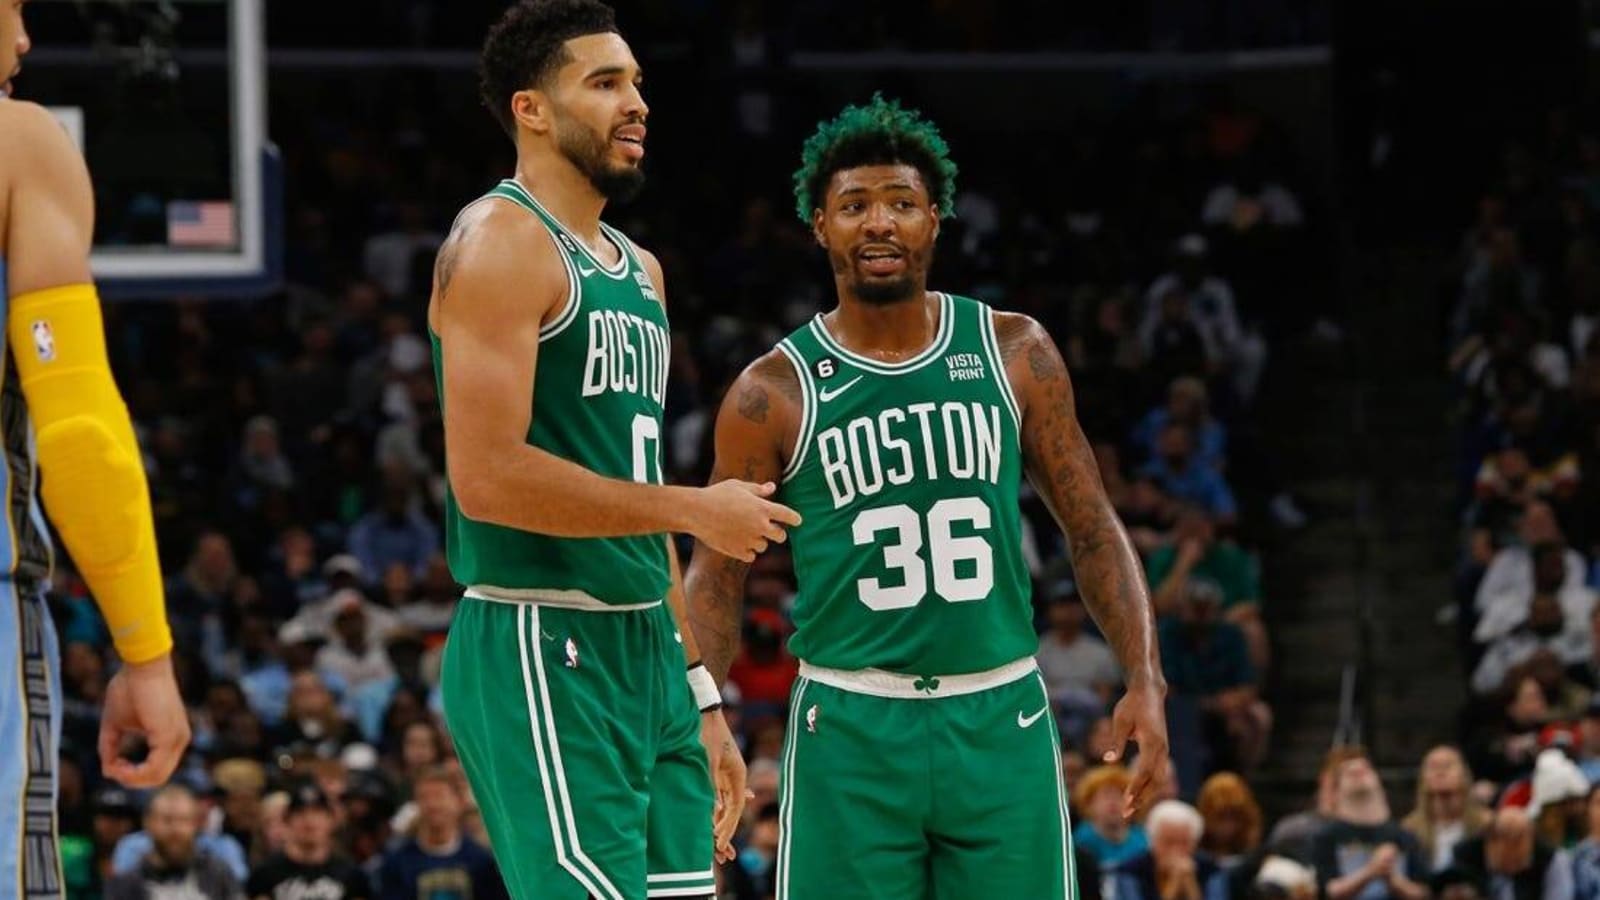 After end of win streak, Celtics home to face Mavs